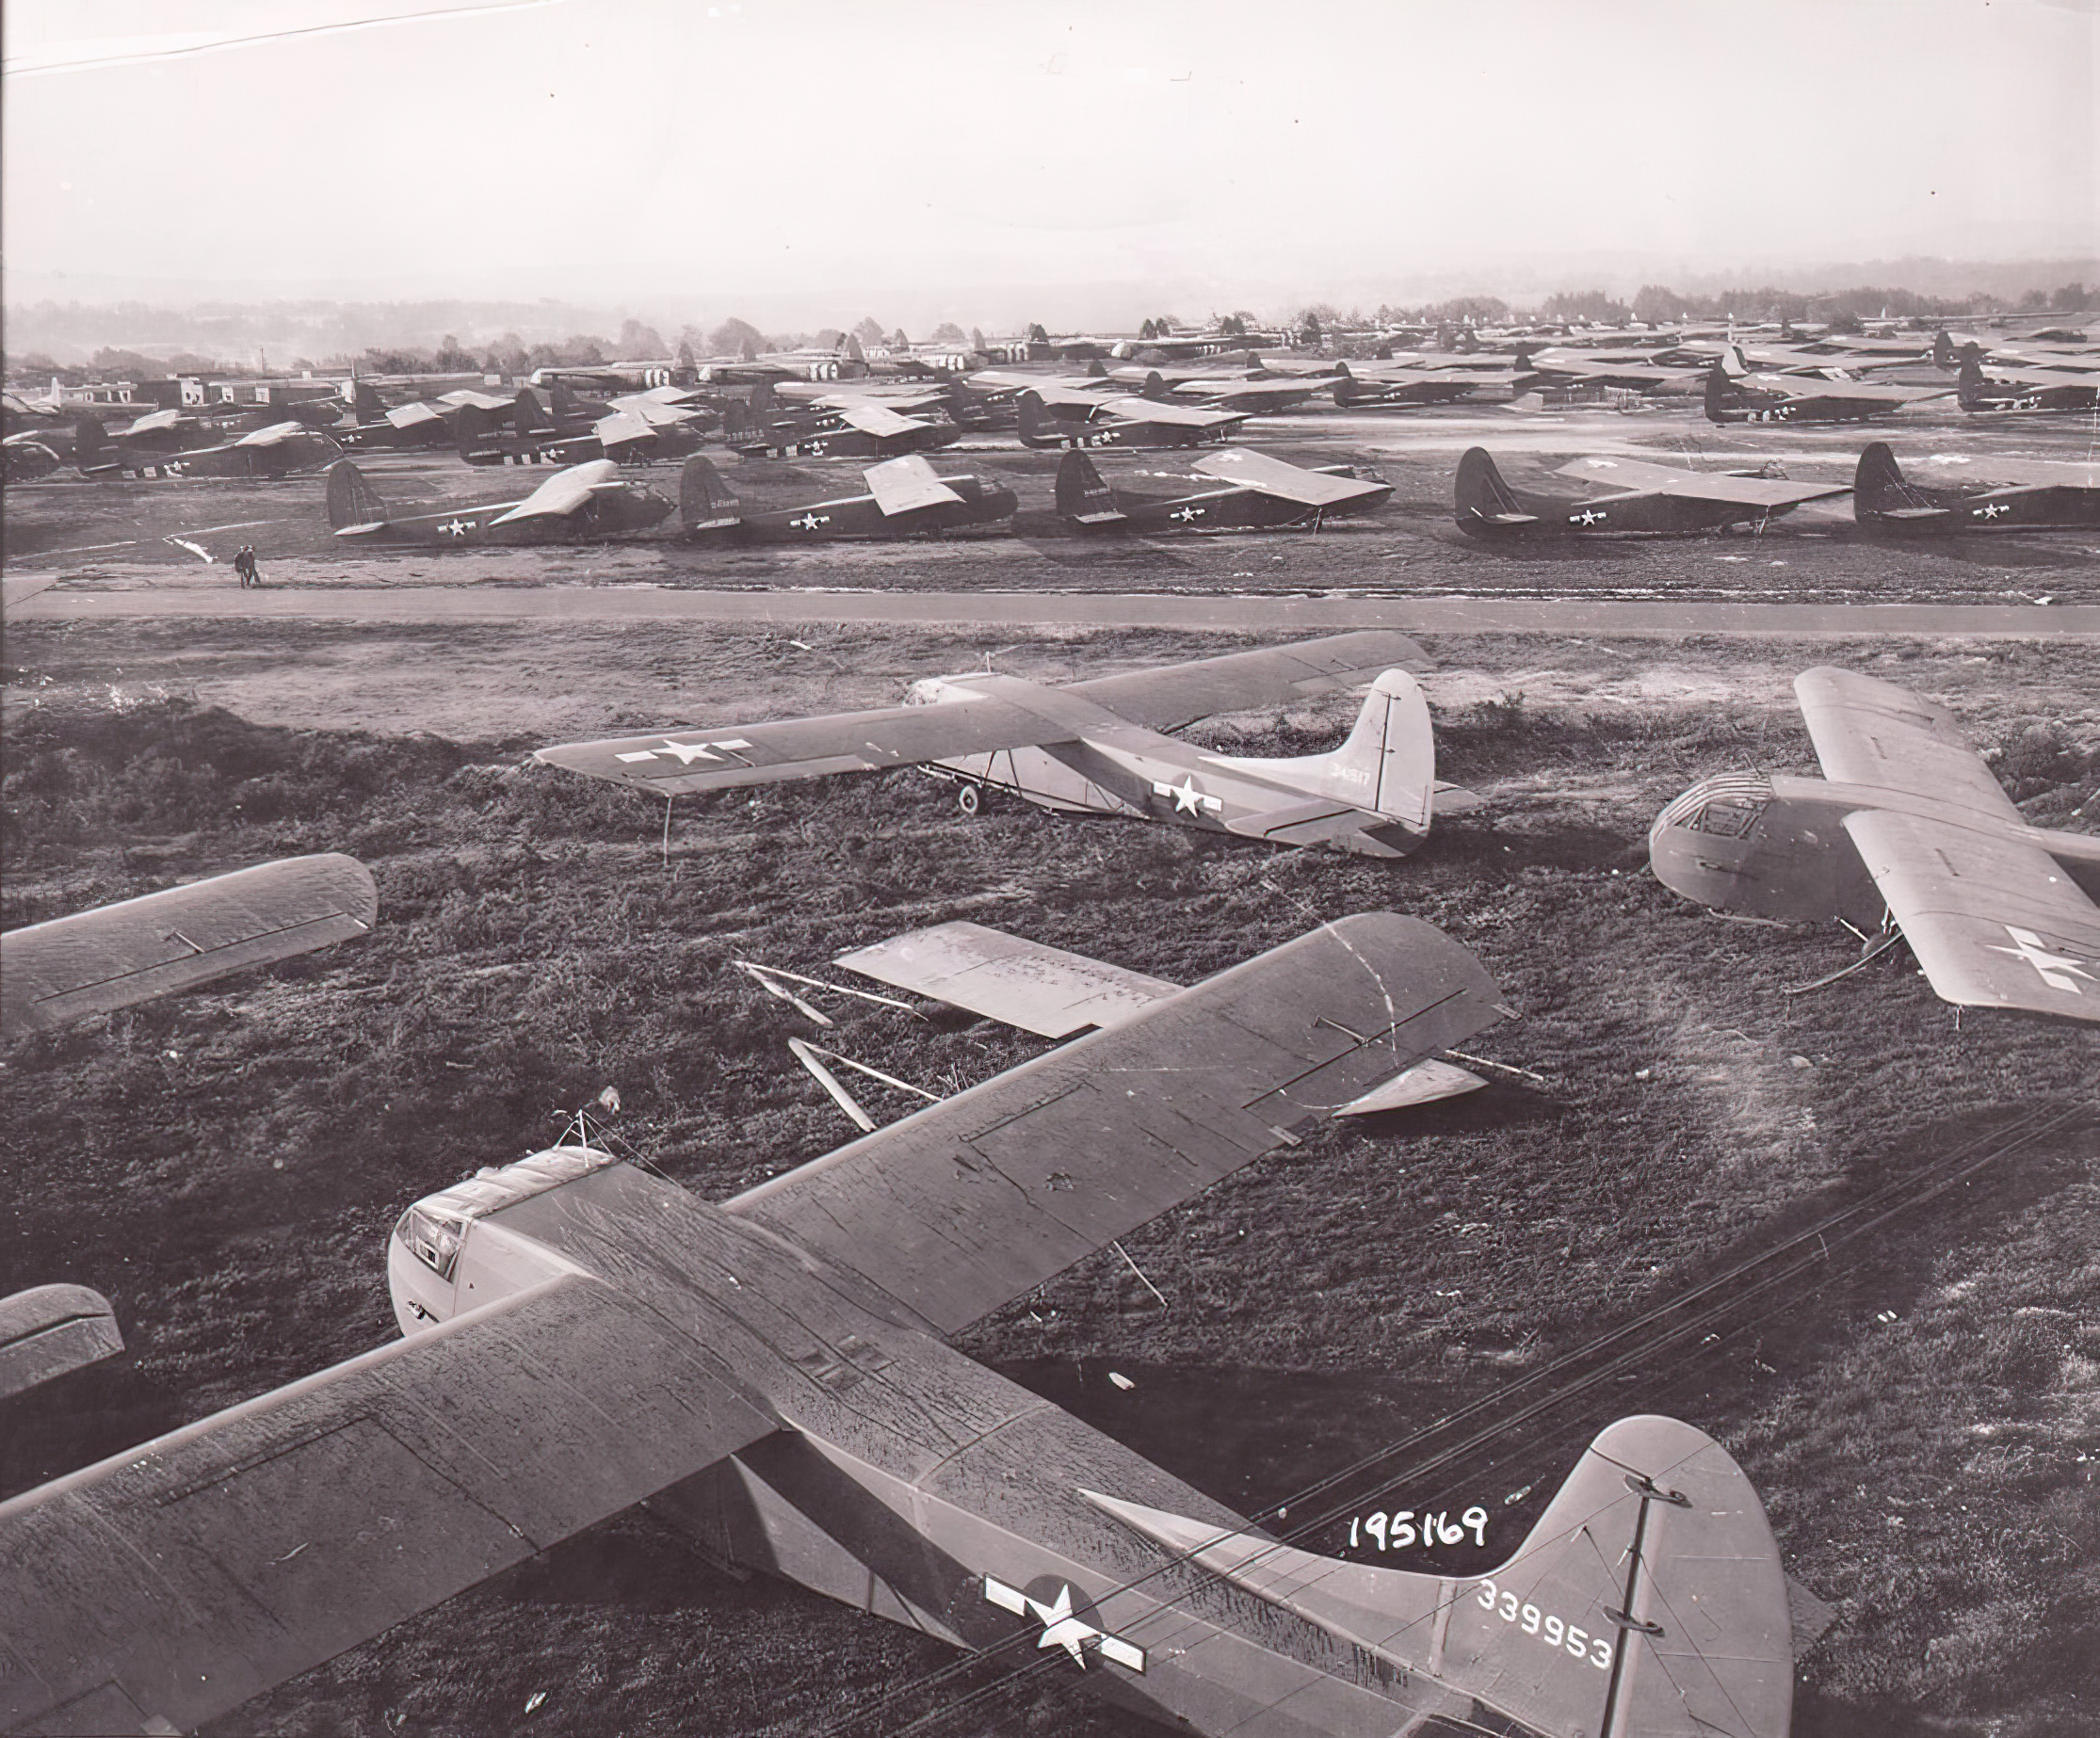 The 101st Airborne Division was reinforced with twelve glider serials on September 18. Here, Waco gliders are lined up on an English airfield in preparation for the next lift to Holland